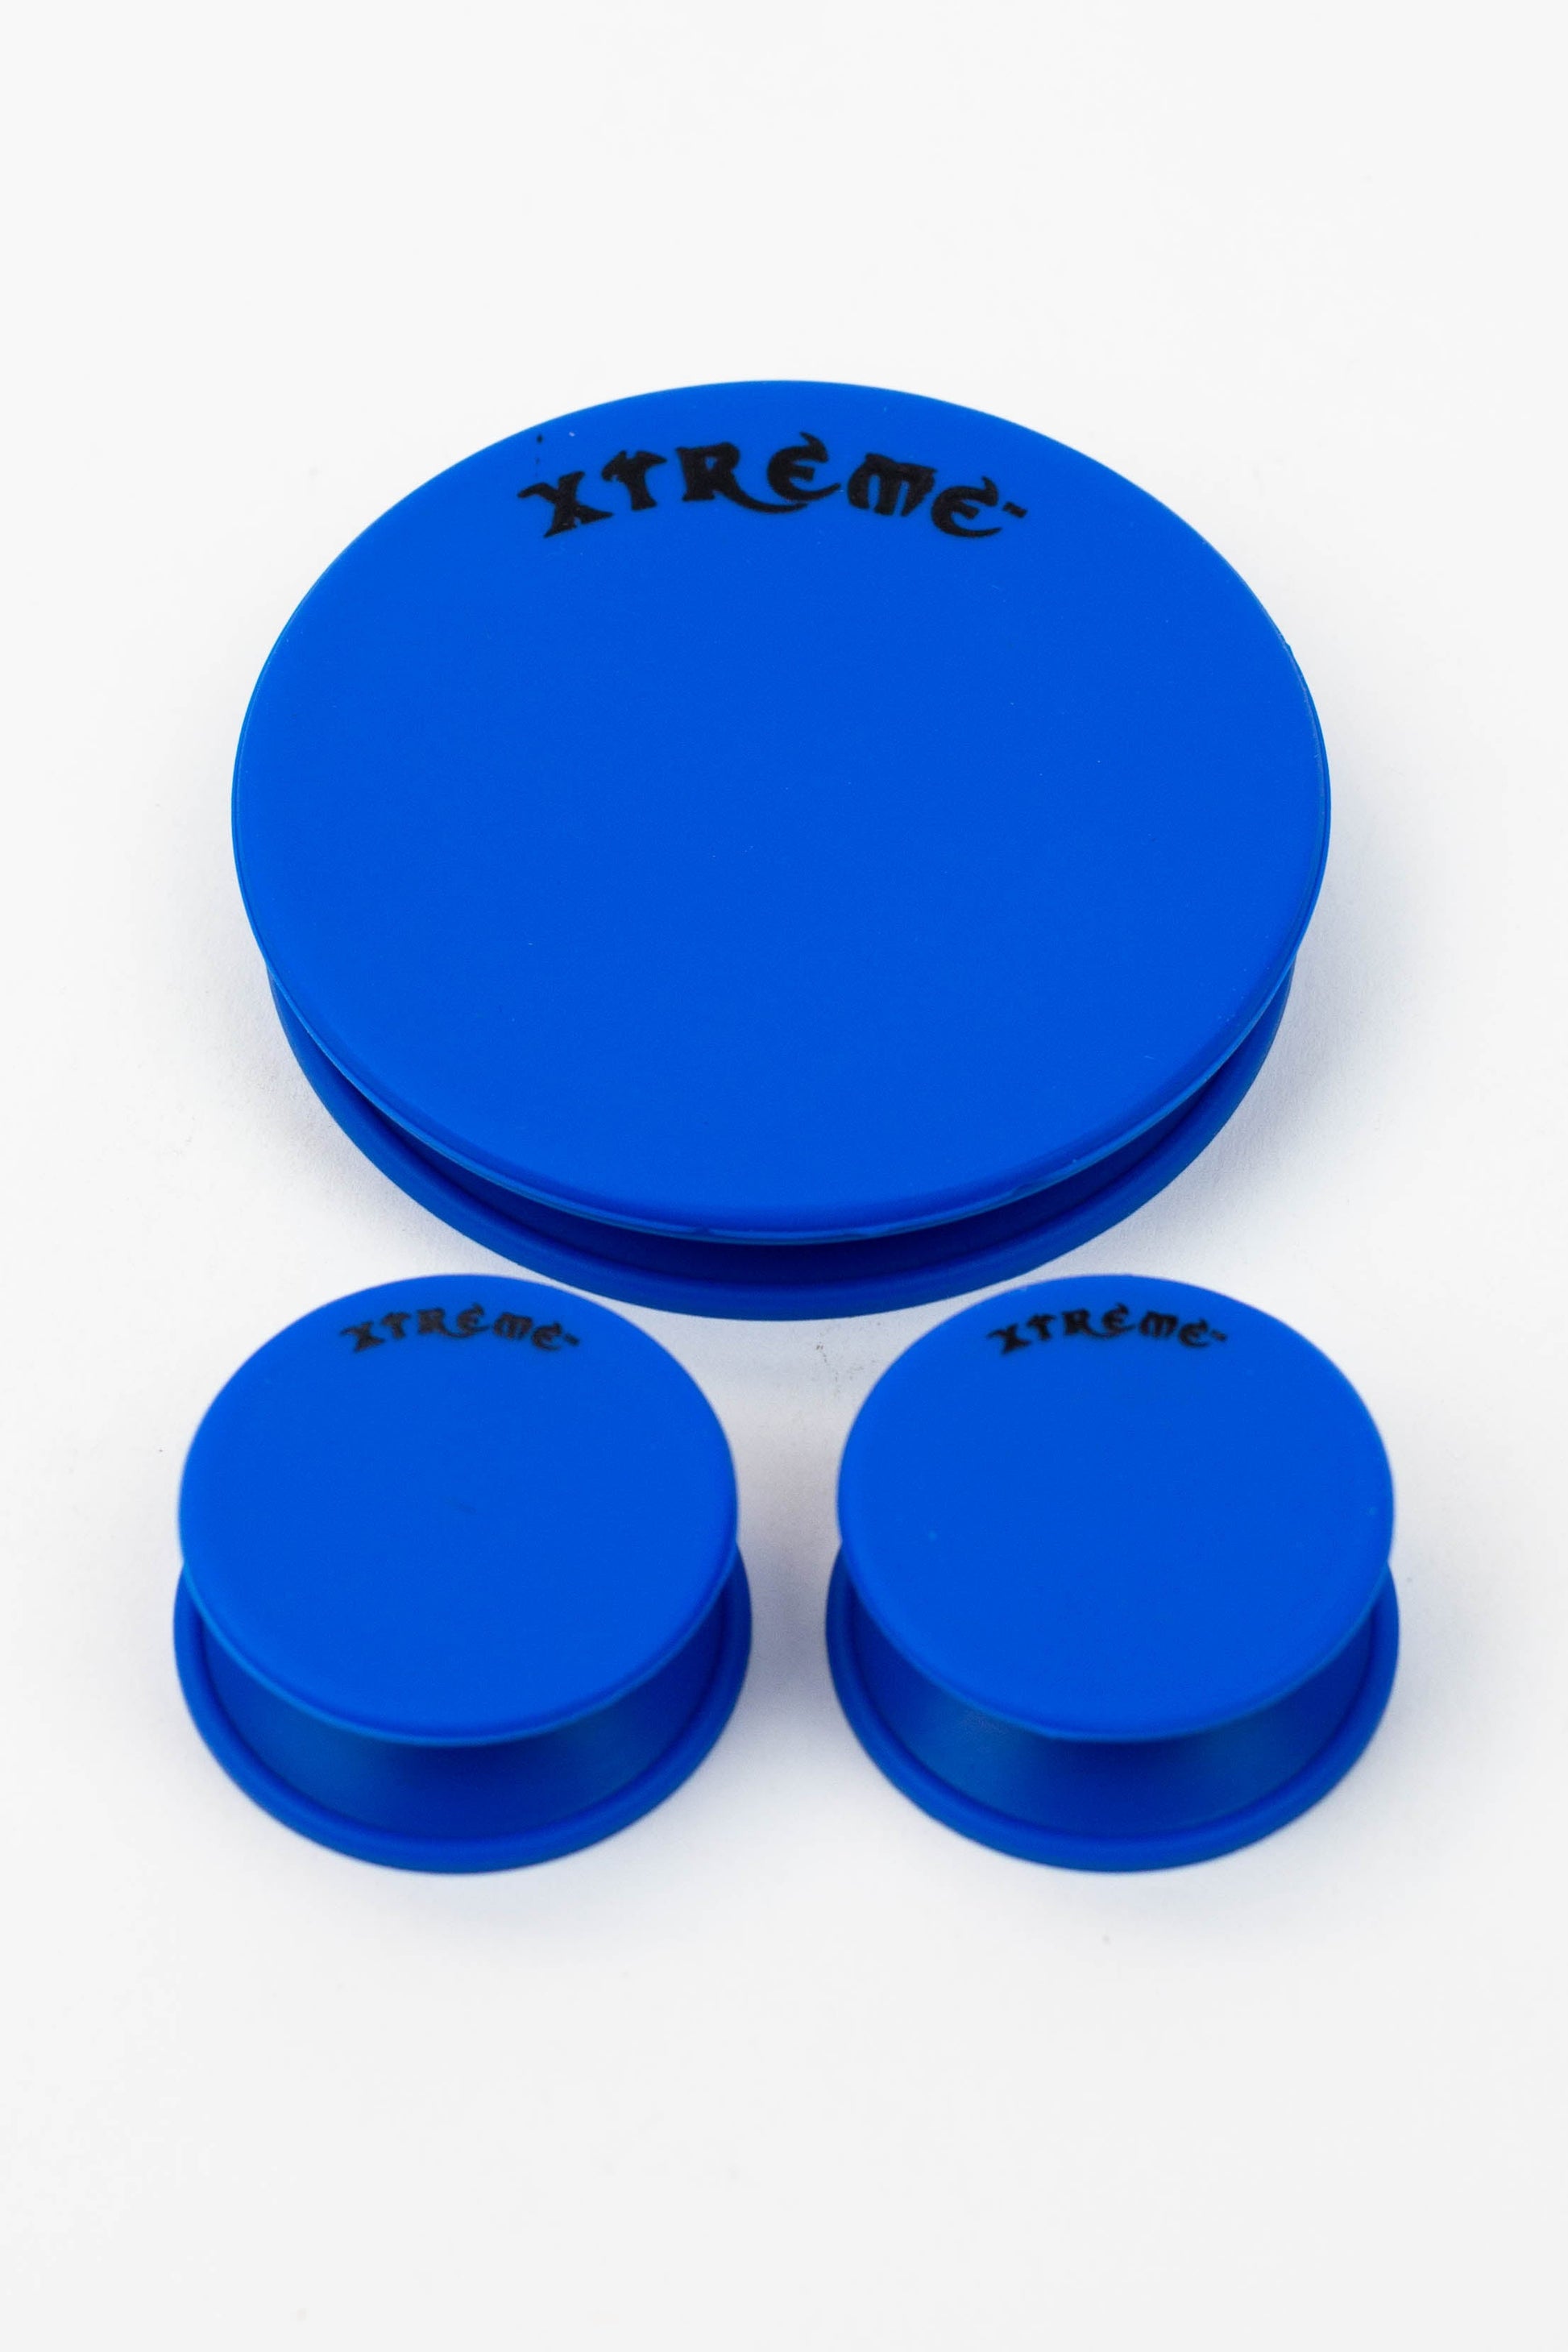 XTREME Caps Universal Caps for Cleaning, Storage, and Odour Proofing Glass Water Pipes/Rigs and More_4